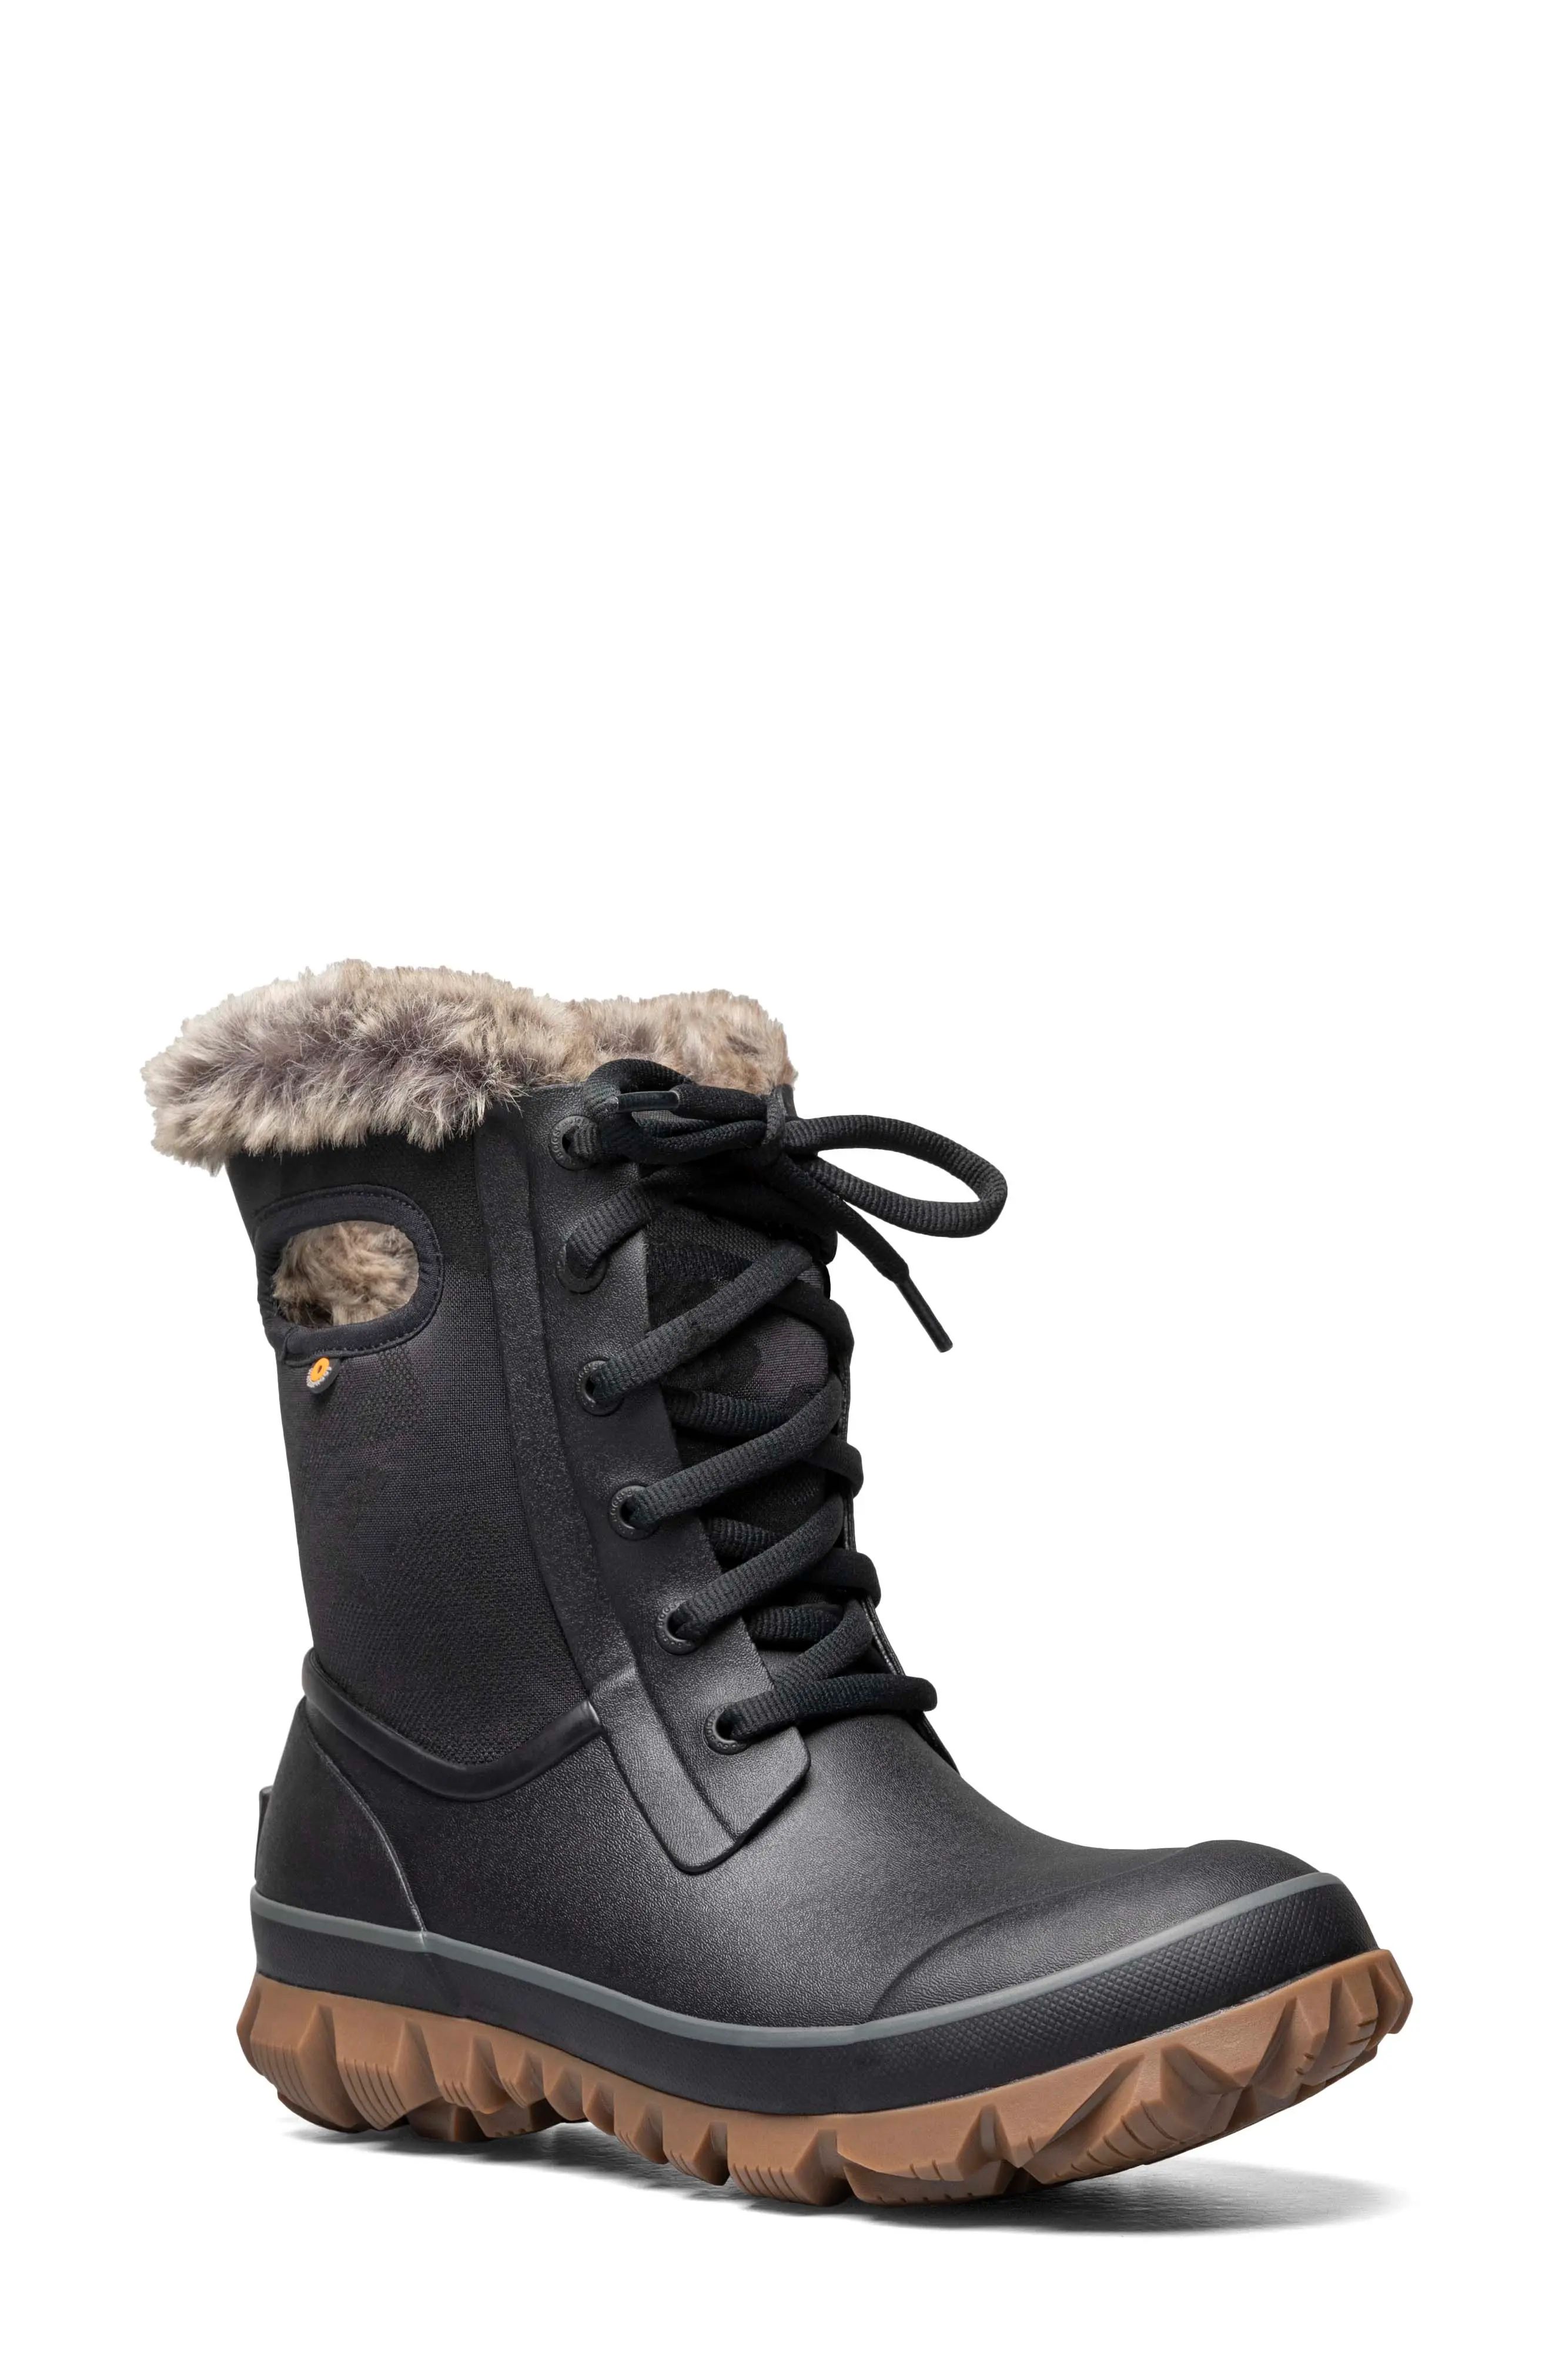 Bogs Arcata Insulated Waterproof Snow Boot in Black at Nordstrom, Size 7 | Nordstrom